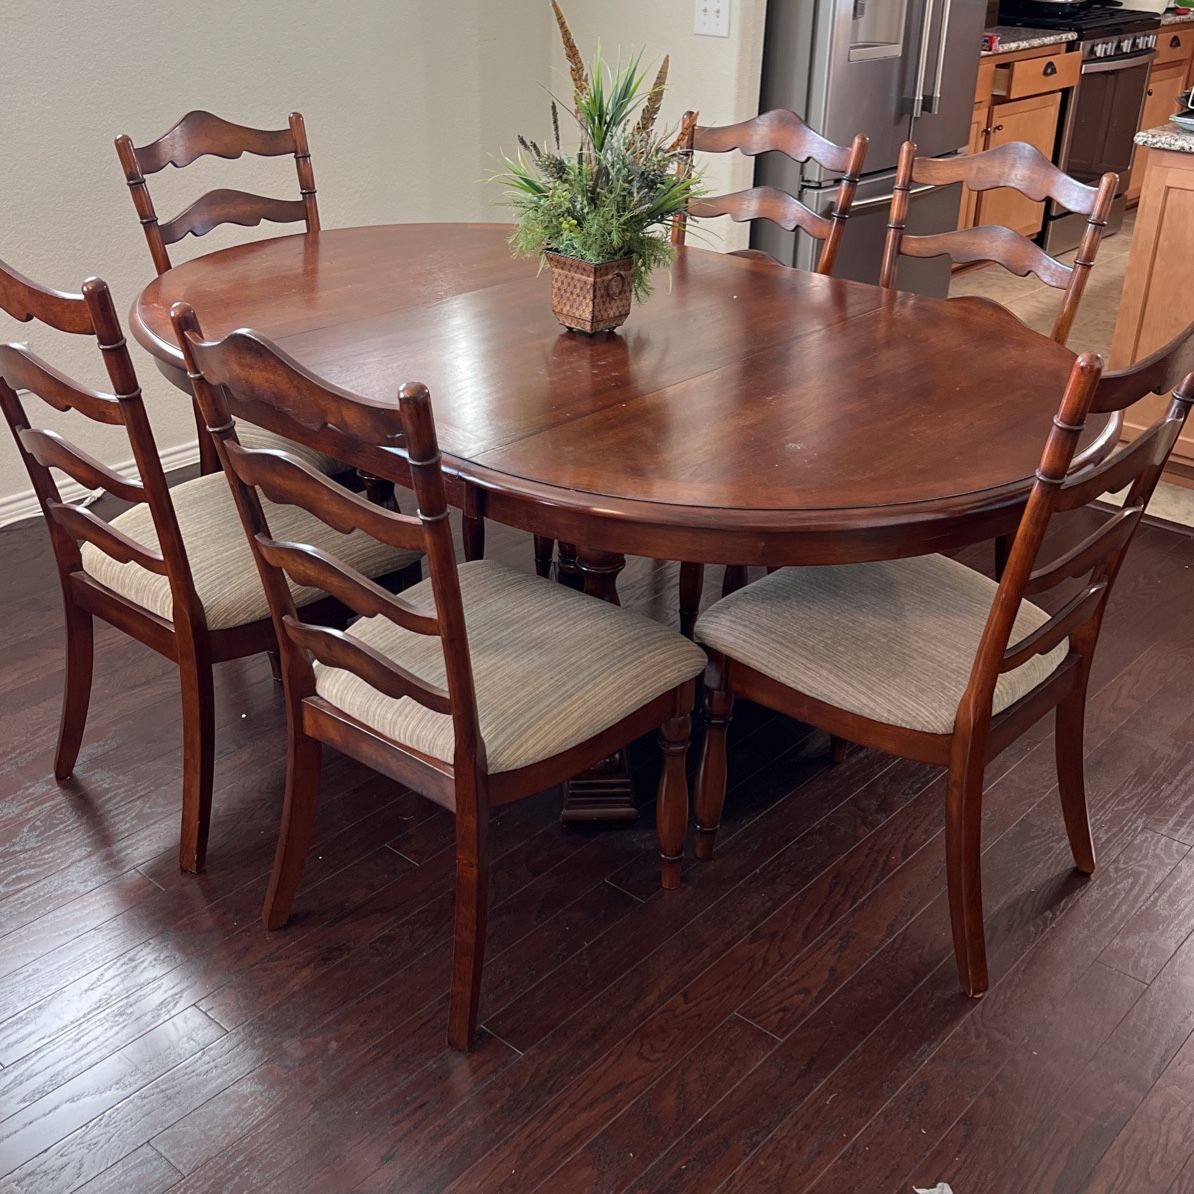 Dining Table and 6 Chairs  71x47 Inches